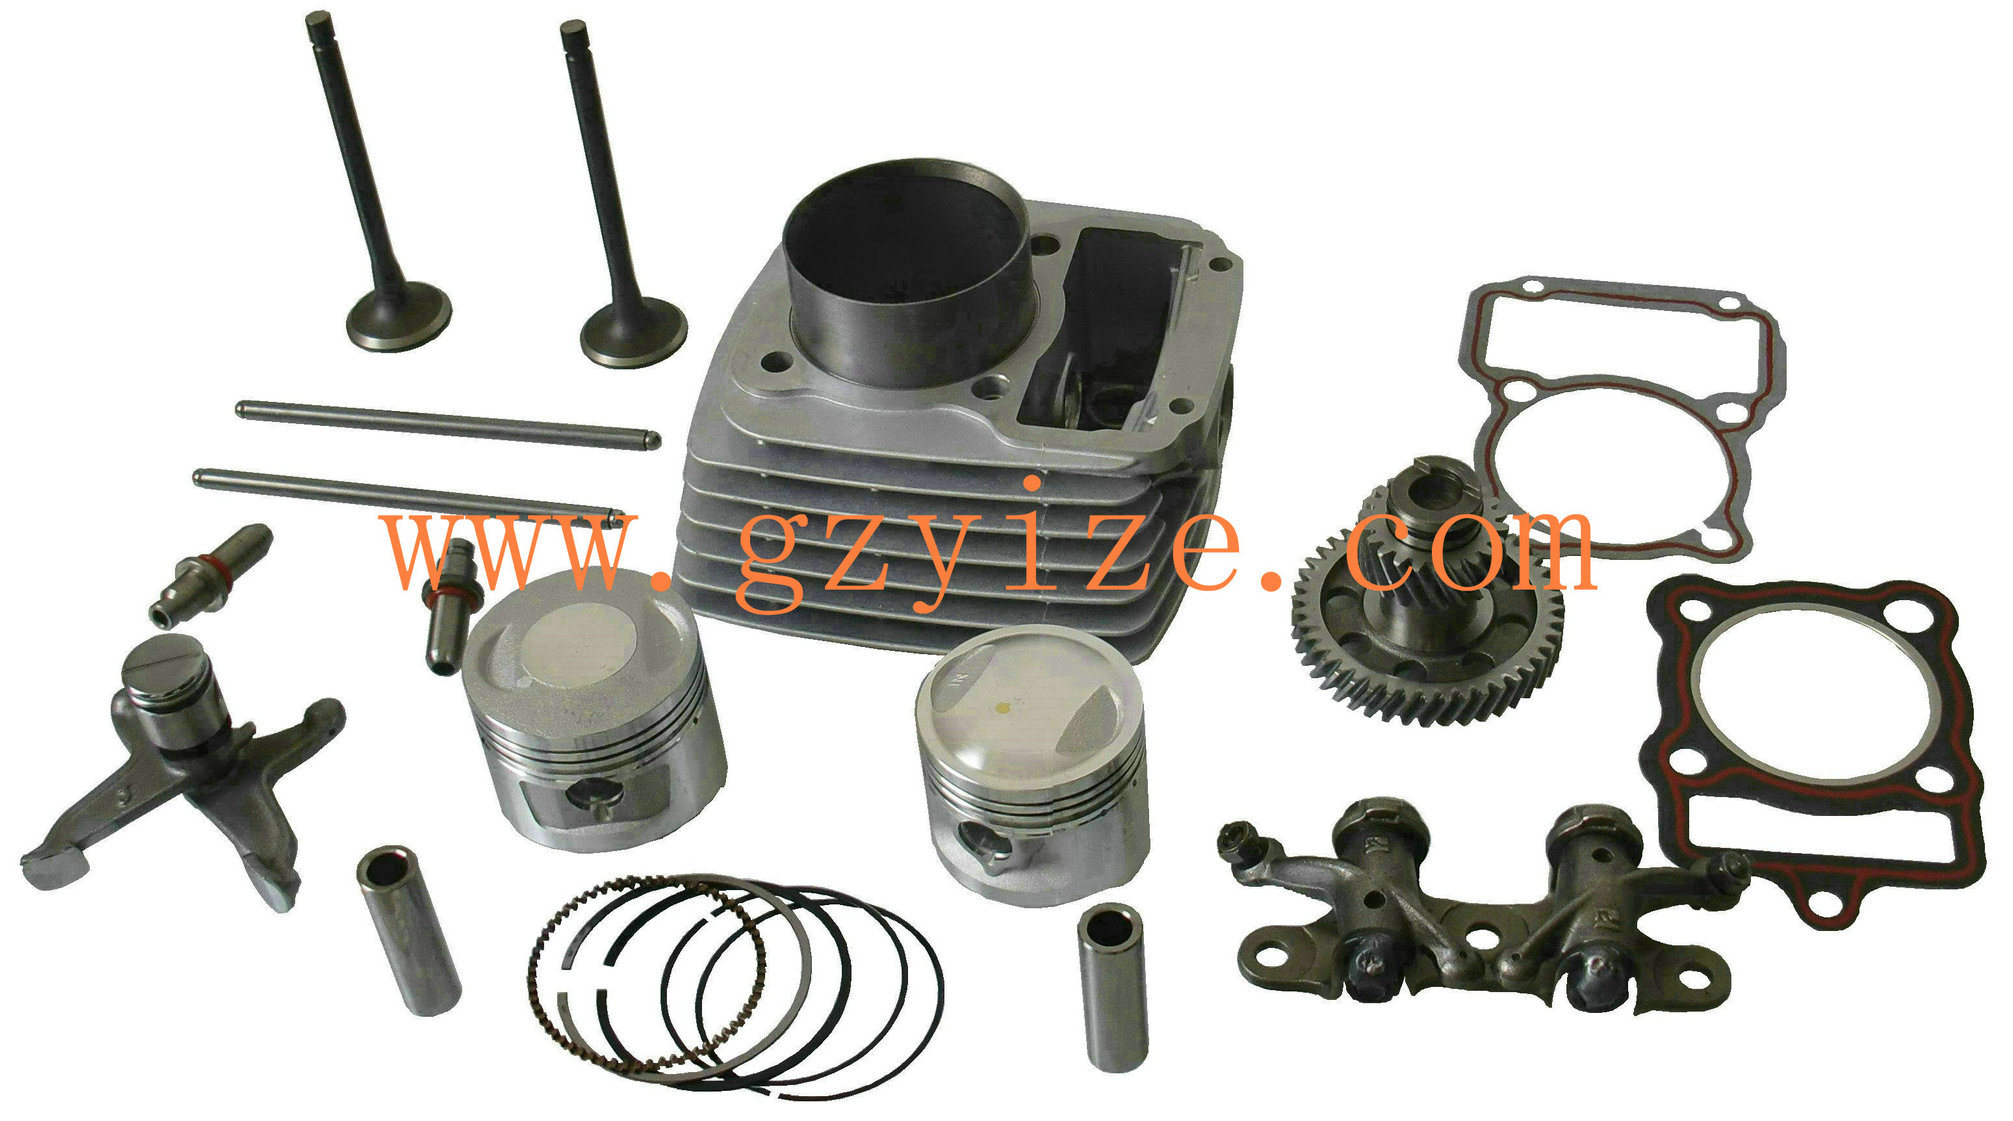 Motorcycle Engine Part